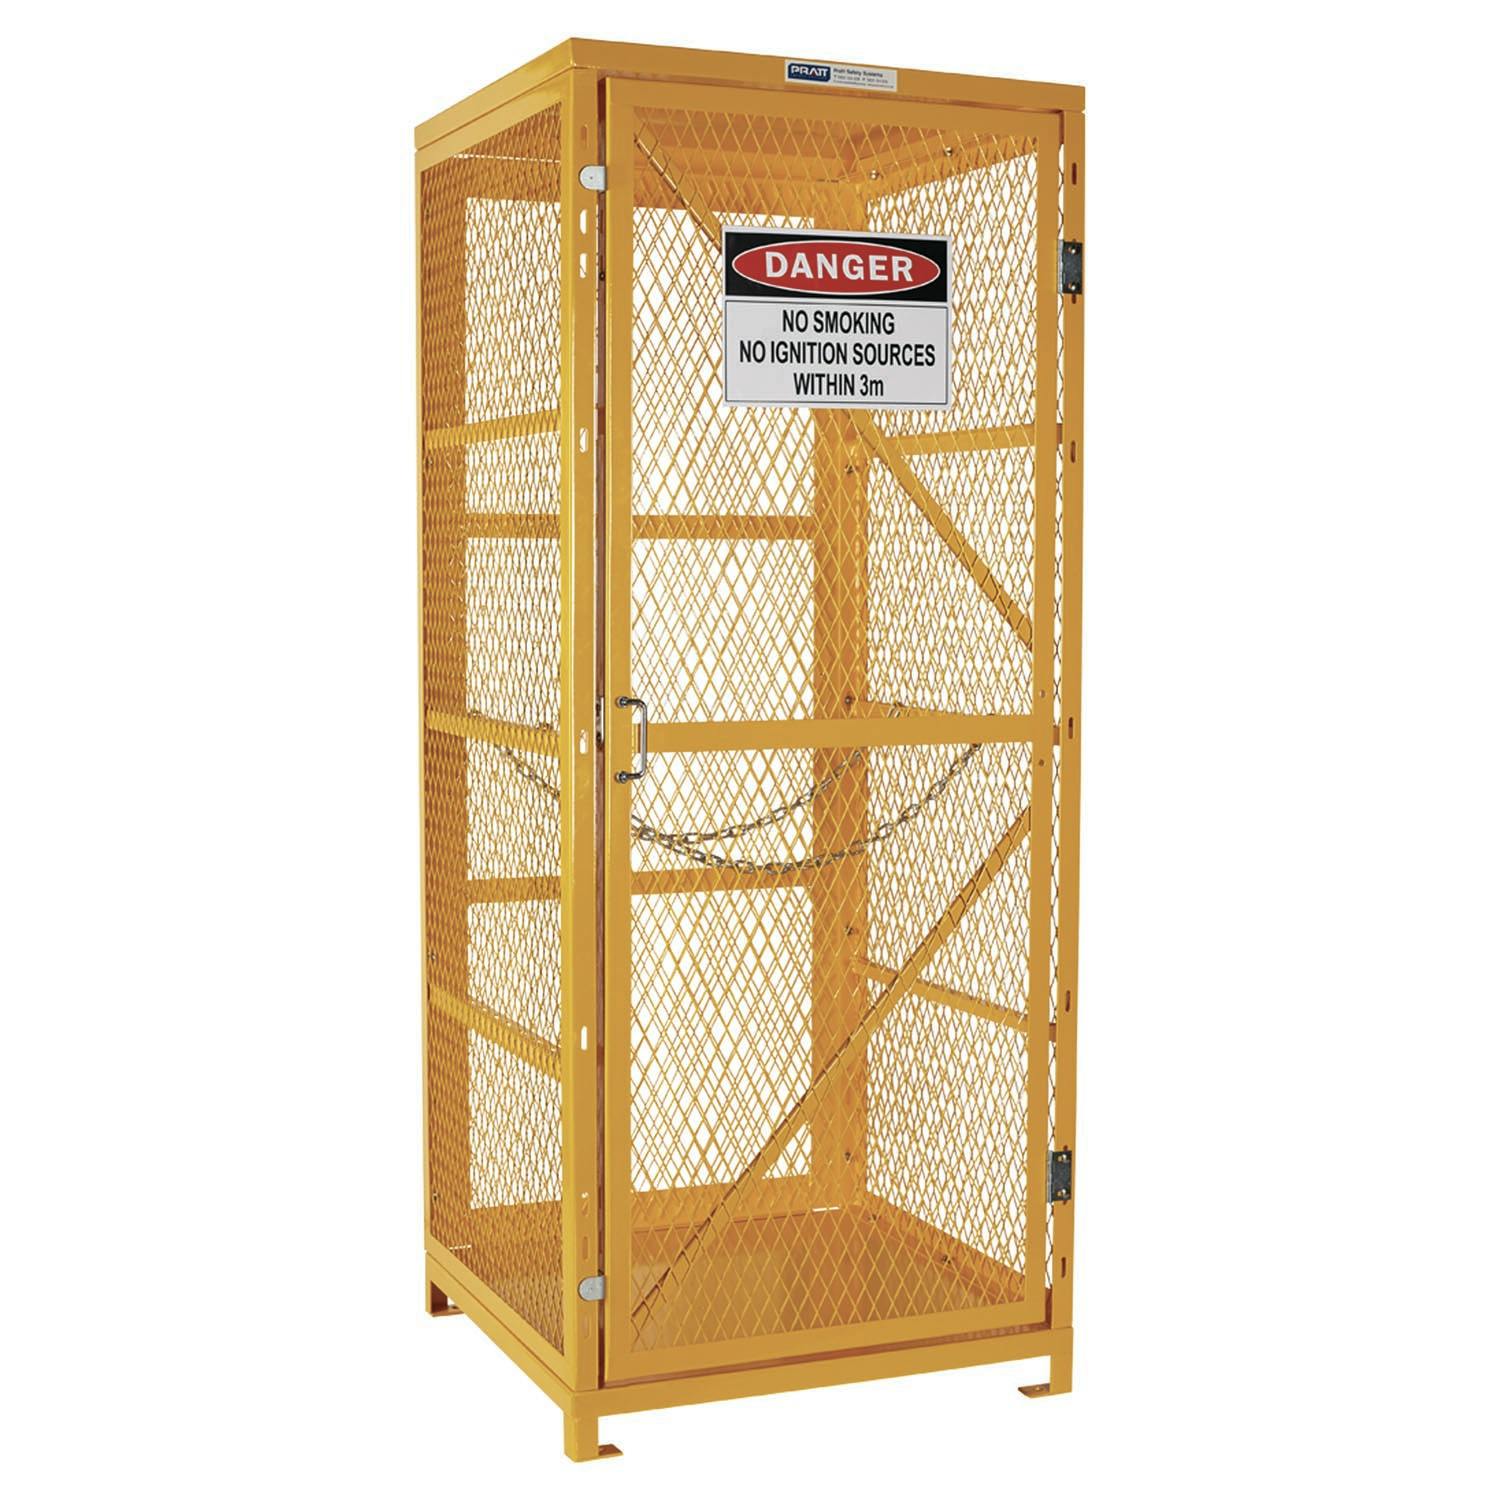 Pratt Gas Cylinder Storage Cage. 1 Storage Level Up To 9 G-Sized Cylinders. (Comes Flat Packed - Assembly Required)